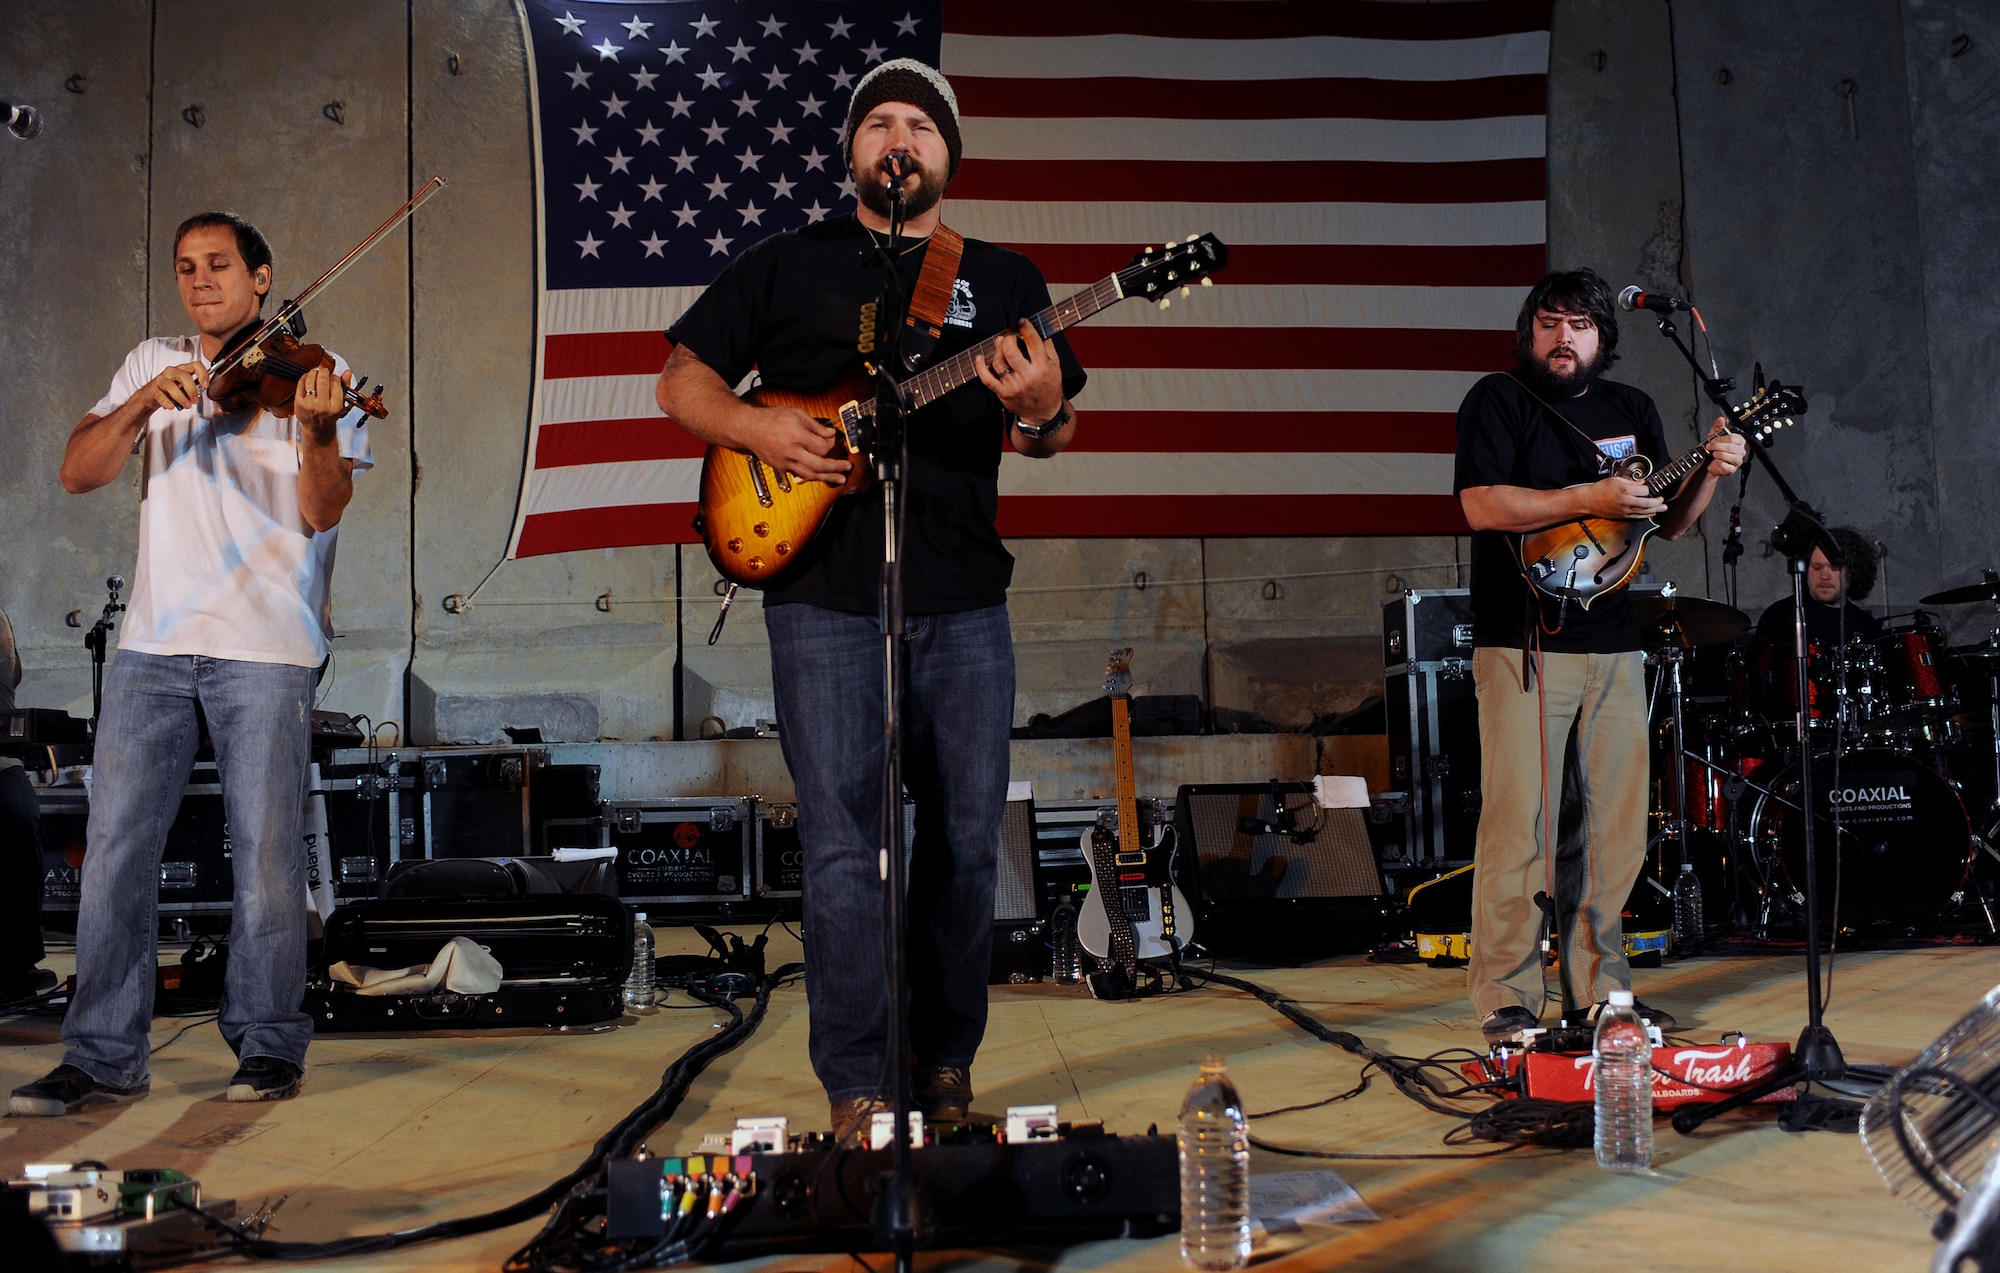 Members of the Zac Brown Band perform for a crowd of deployed personnel at Holt Stadium at Joint Base Balad, Iraq, April 18, 2010. The Grammy-nominated band is touring various bases throughout Southwest Asia to perform for the troops rather than attend this year's Academy of Country Music Awards for which they were nominated for several awards. (U.S. Air Force photo by Master Sgt. Linda C. Miller/Released)